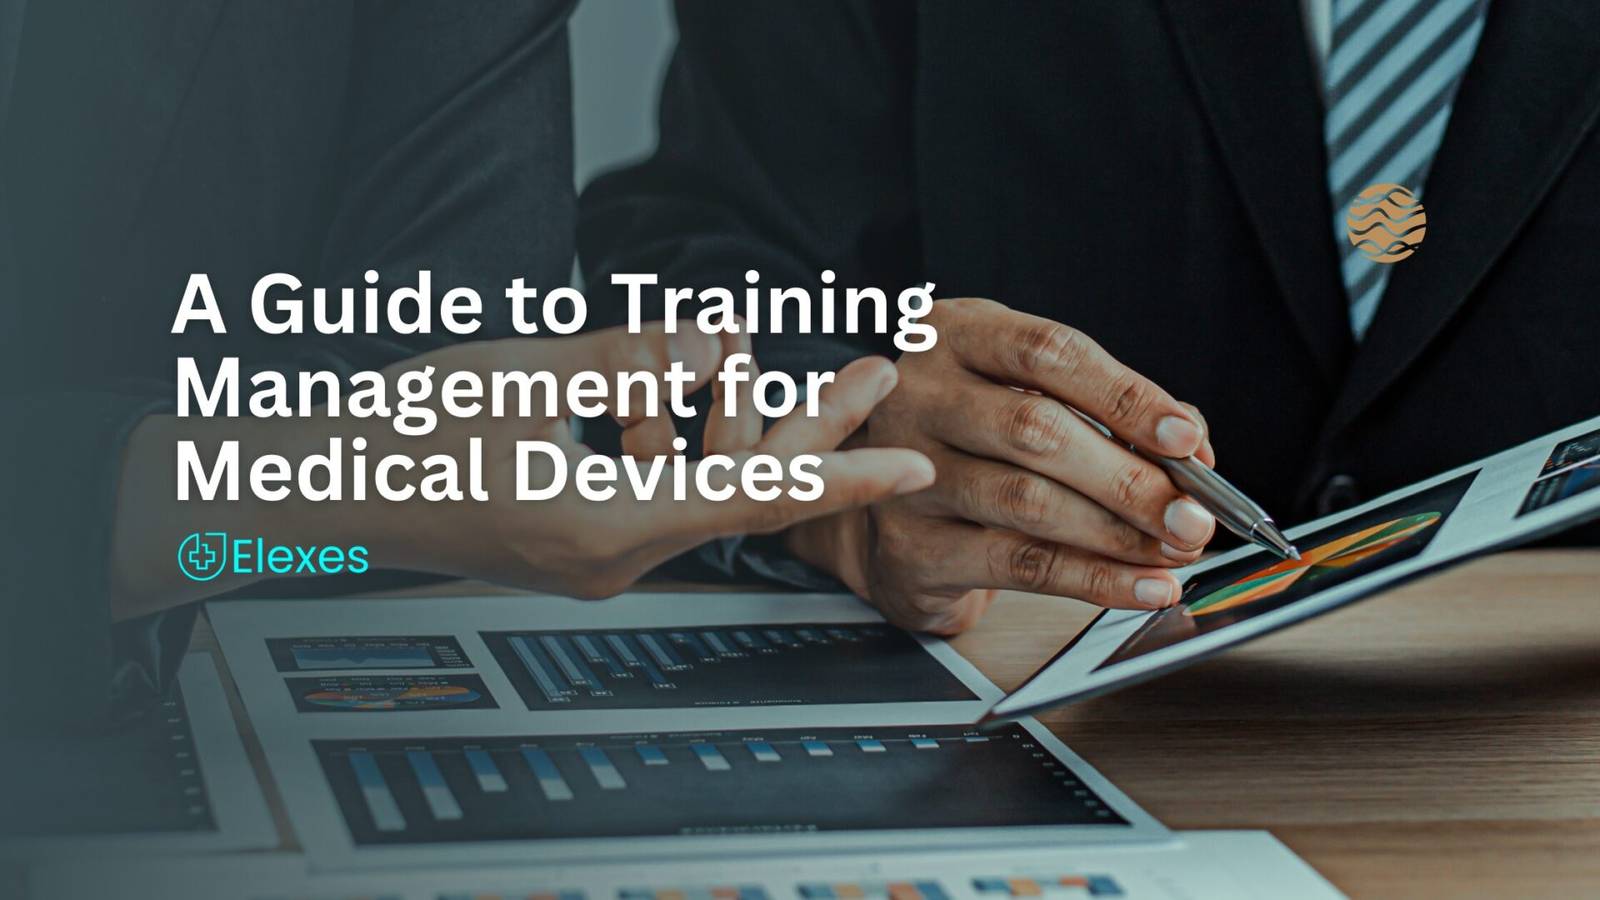 A Guide to Training Management for Medical Devices